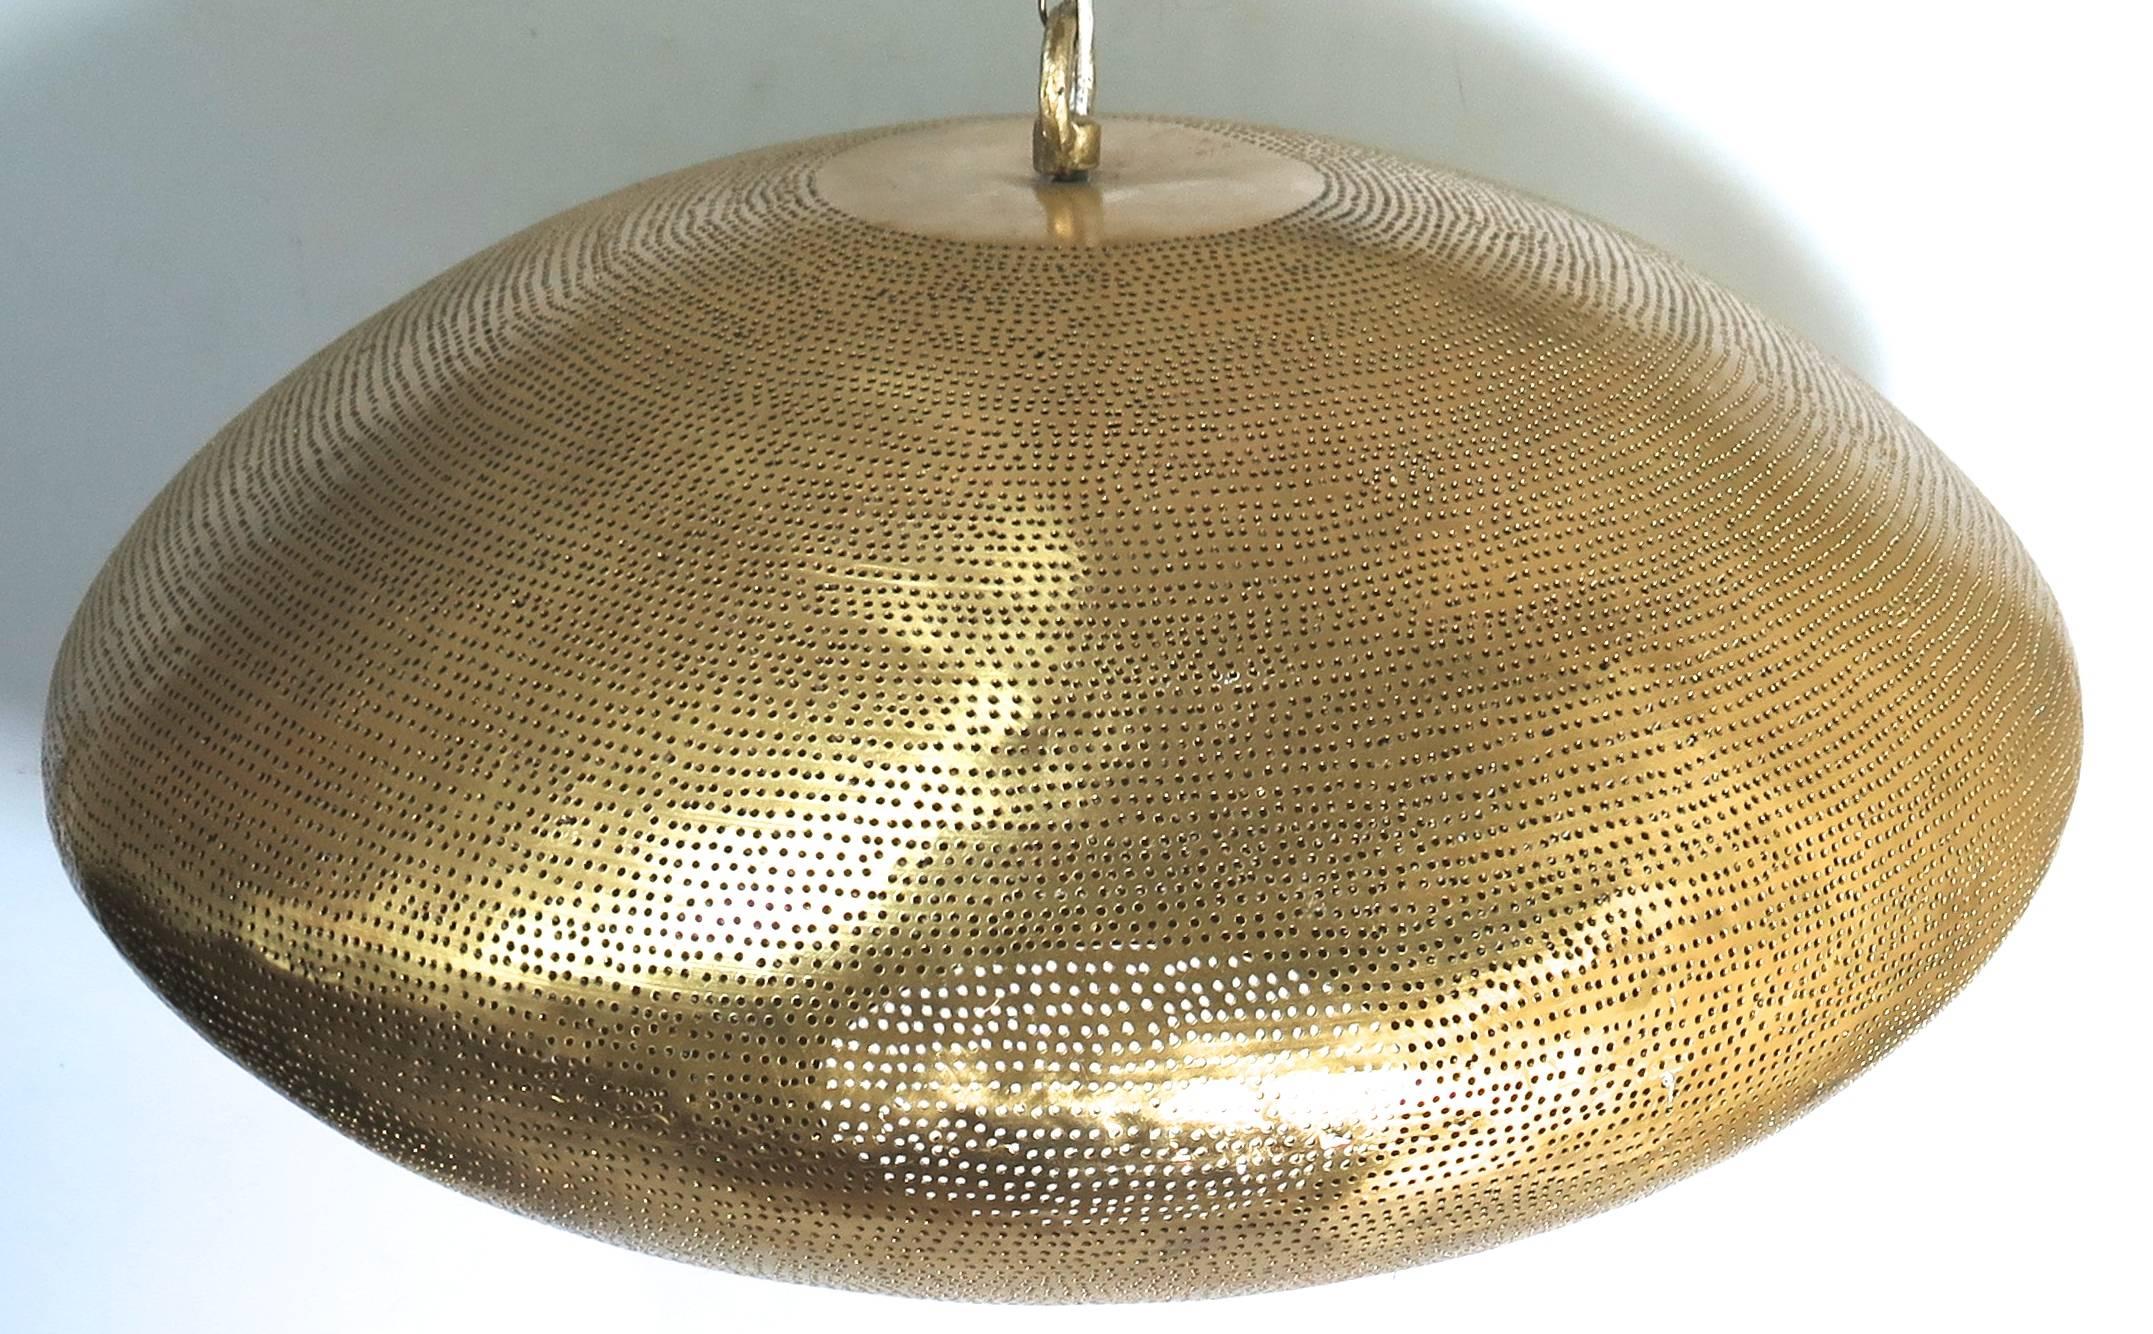 Brass fixture with pierced holes. A modern shape that creates an interesting light. Available in custom sizes. Pictured 21